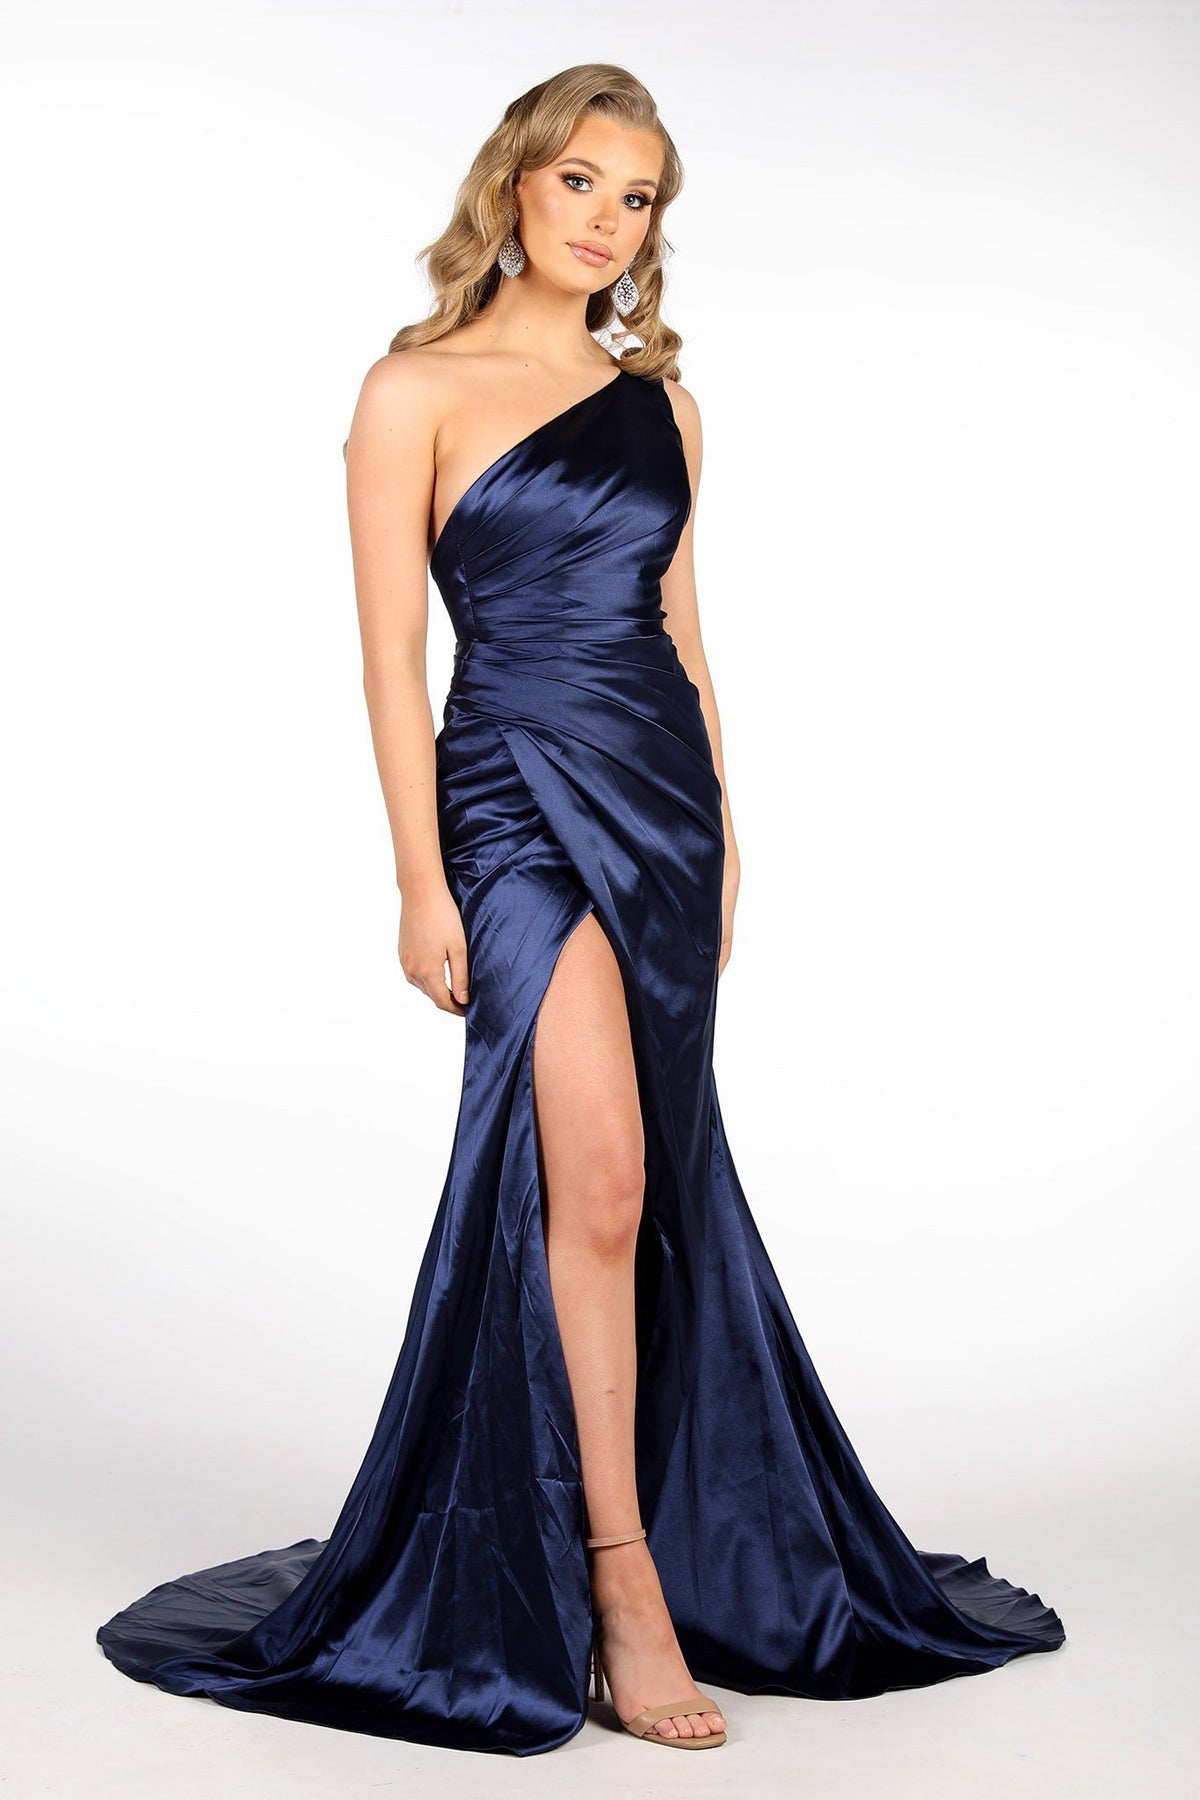 Deep Blue Satin Evening Gown featuring One Shoulder Design, Gathering Ruched Waist Detail, Thigh High Slit and Sweep Train